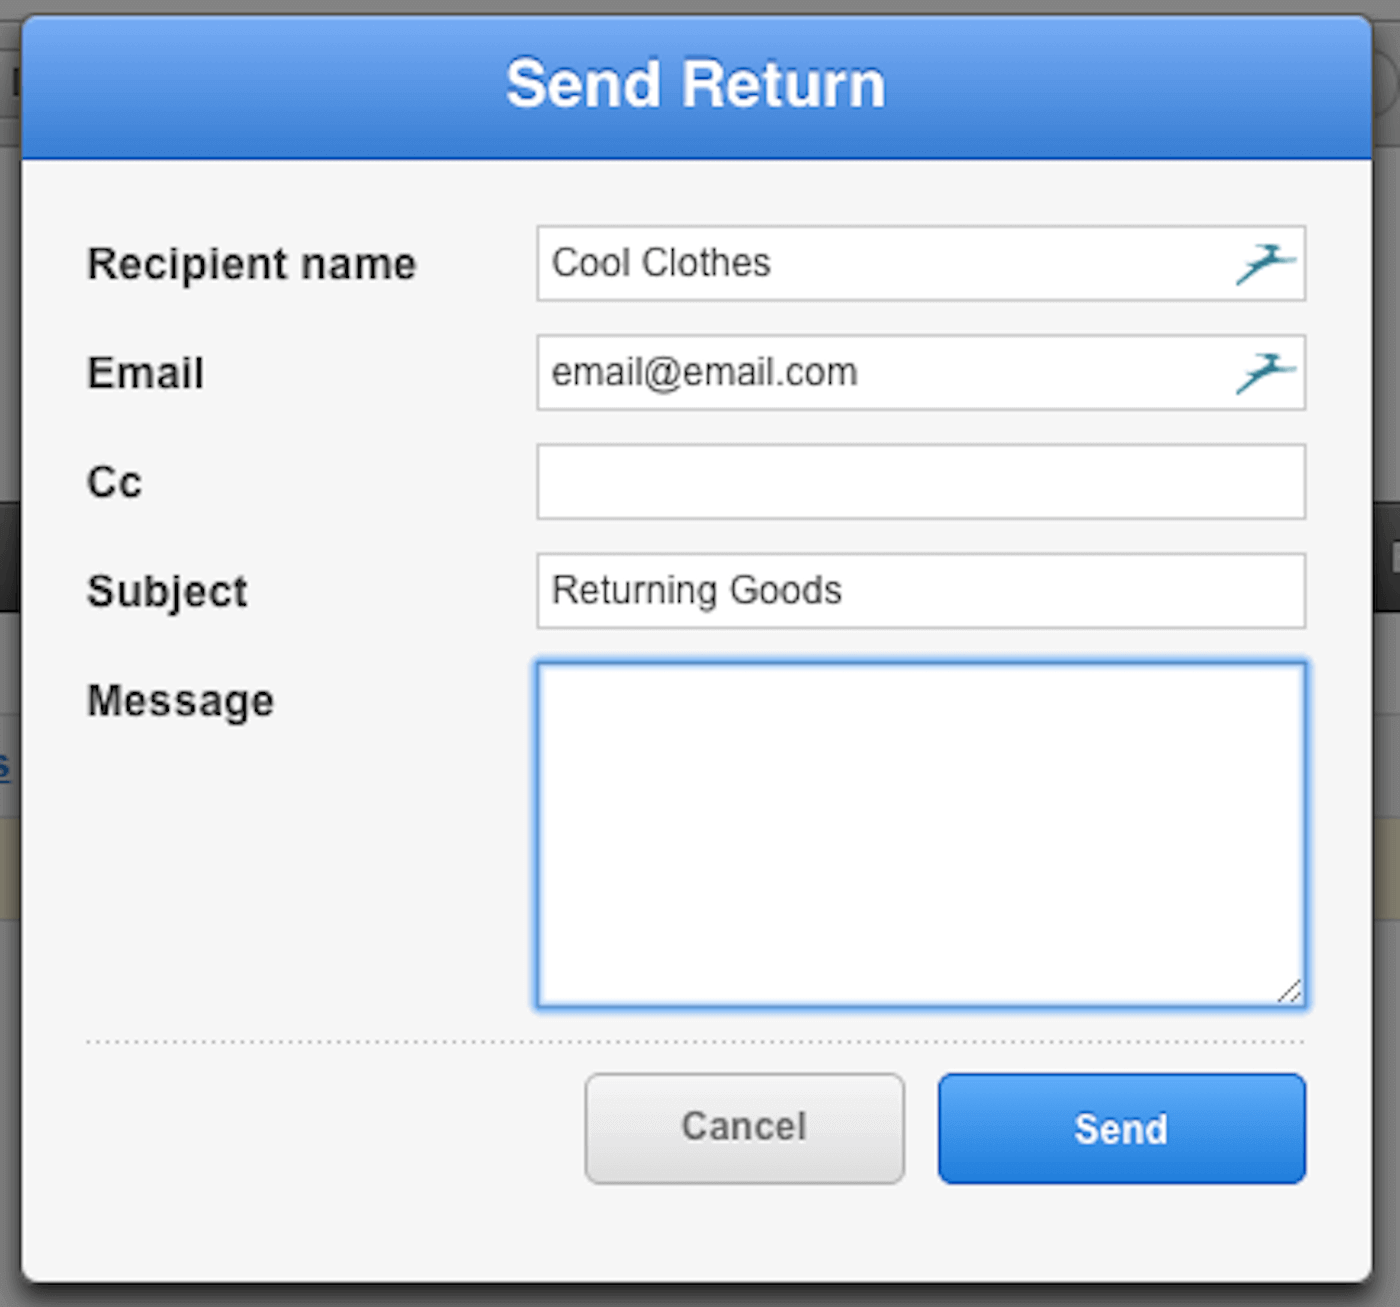 Send return window with example info